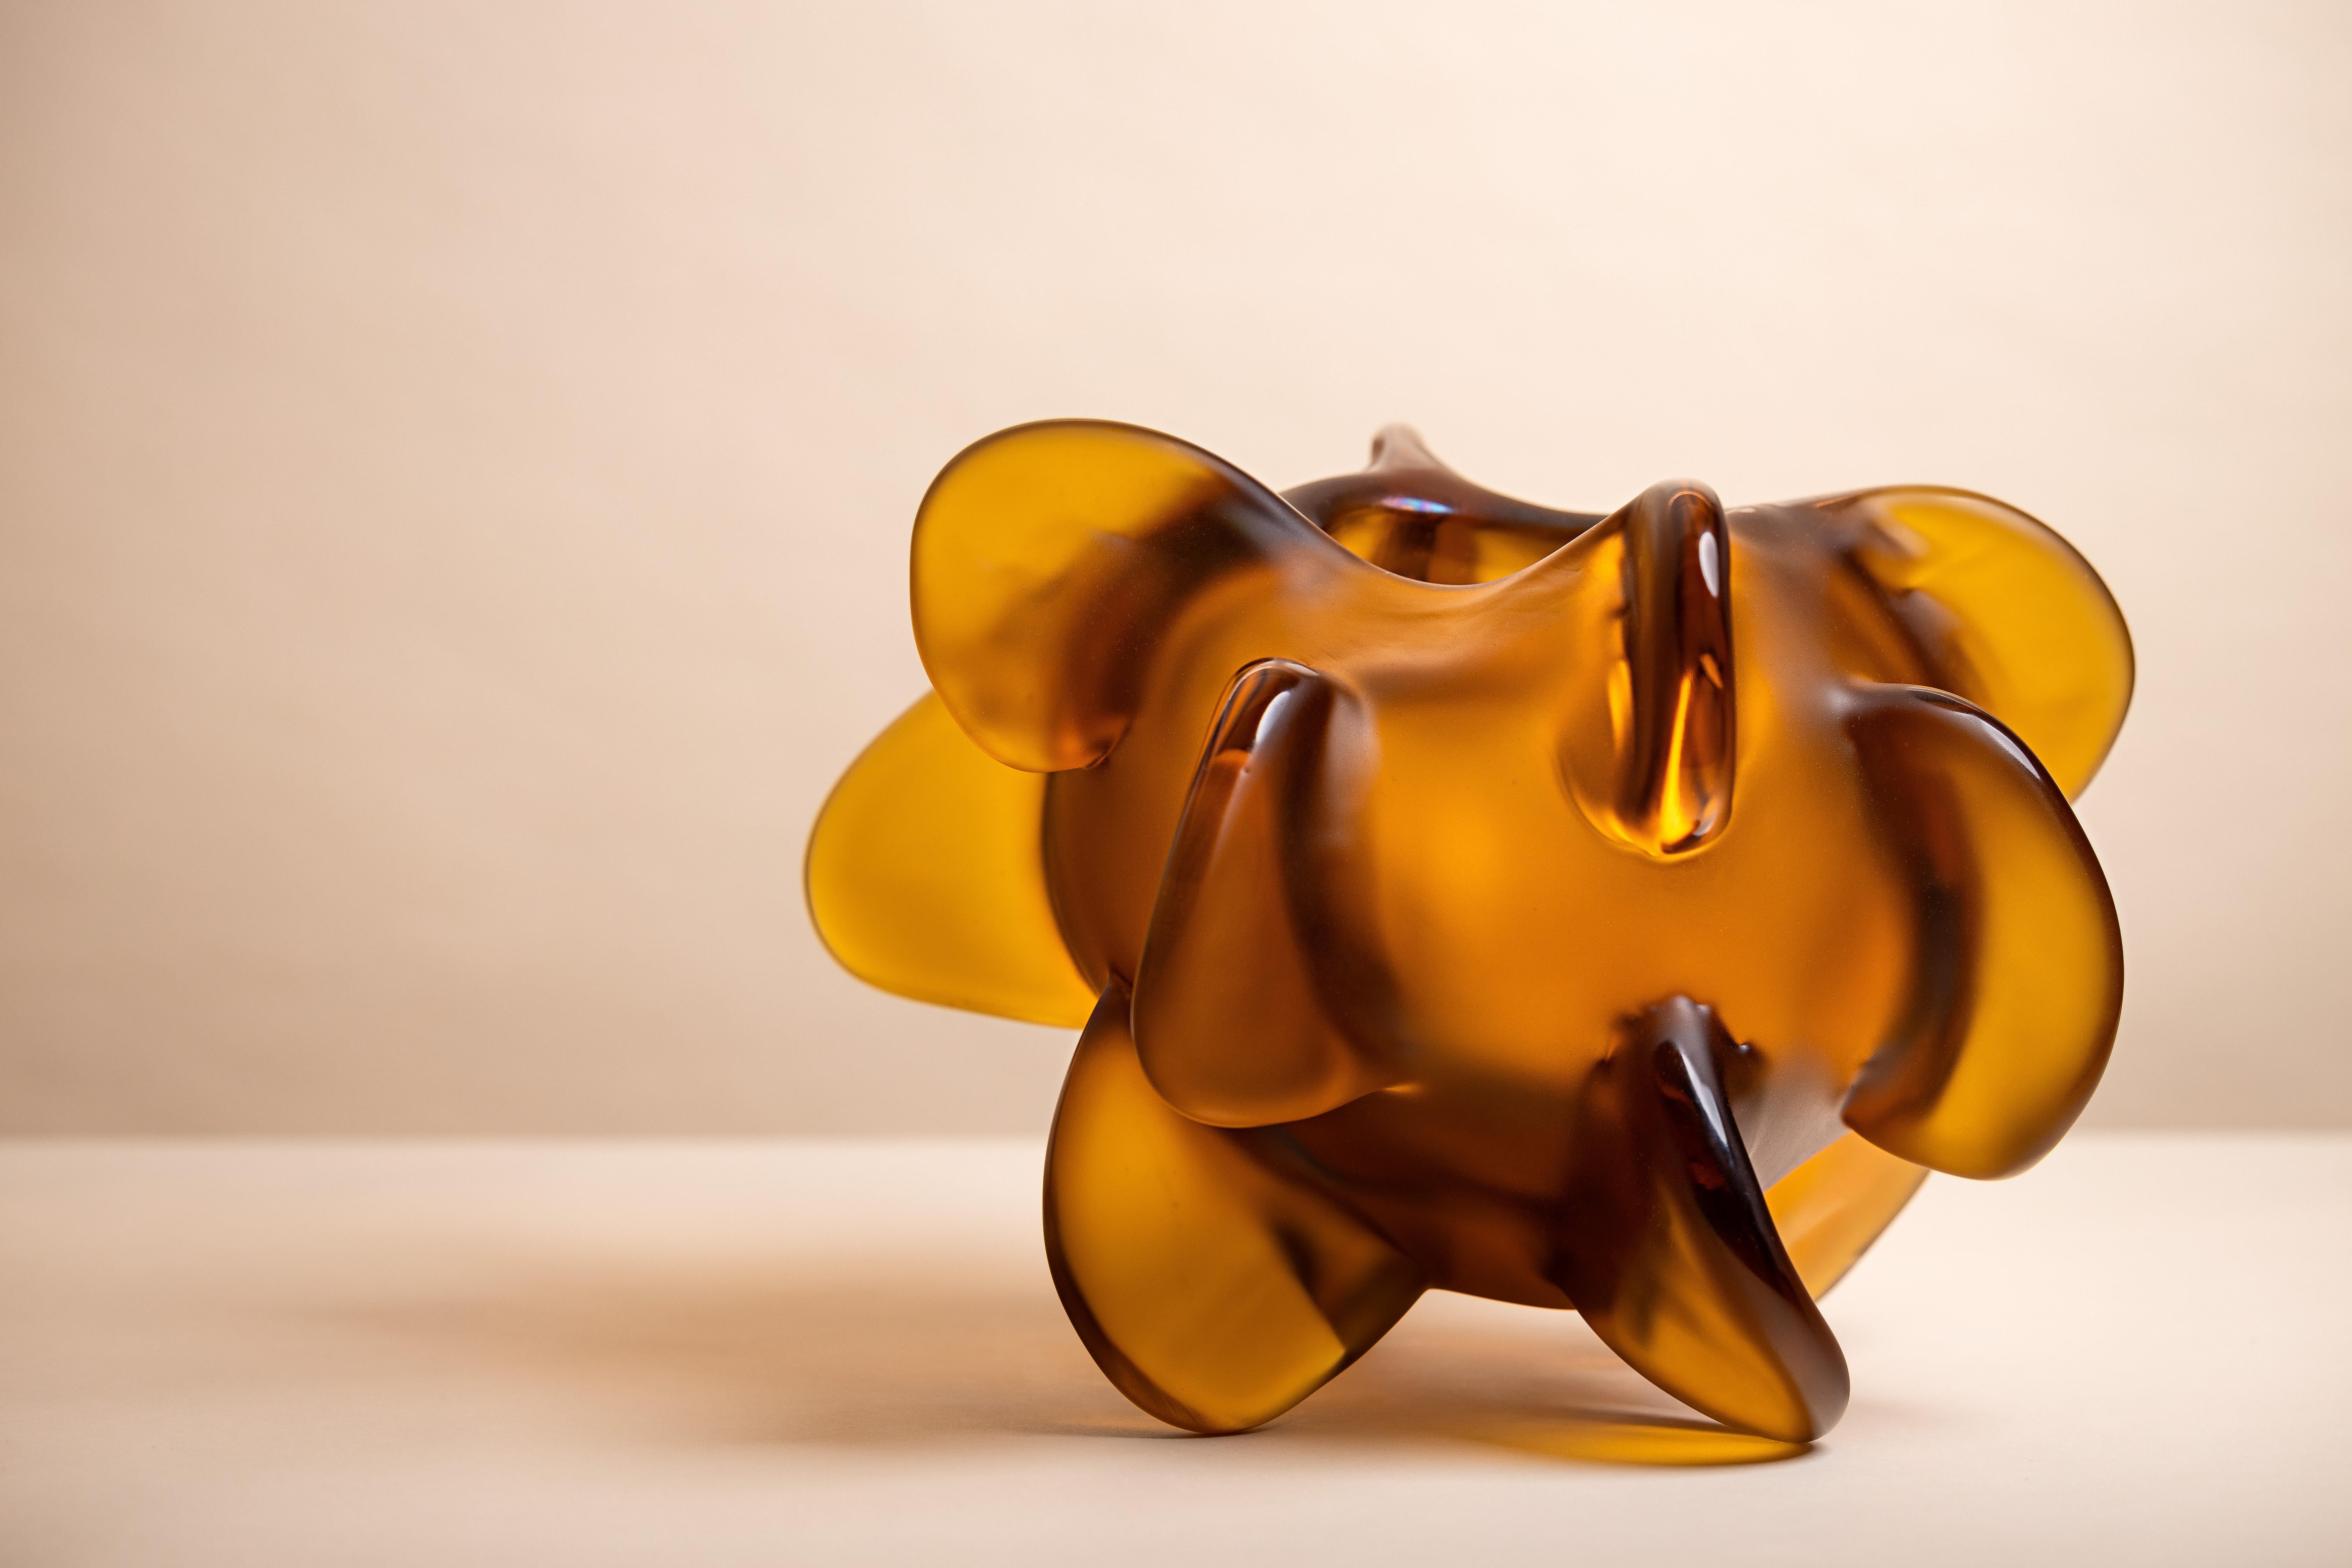 Anemone consists of one-off pieces in amber, gold, dark burgundy, and hydrangea, expressing Michela Cattai’s fascination with nature in all of its unpredictable forms and manifestations. Each piece was crafted in Murano, with the traditional